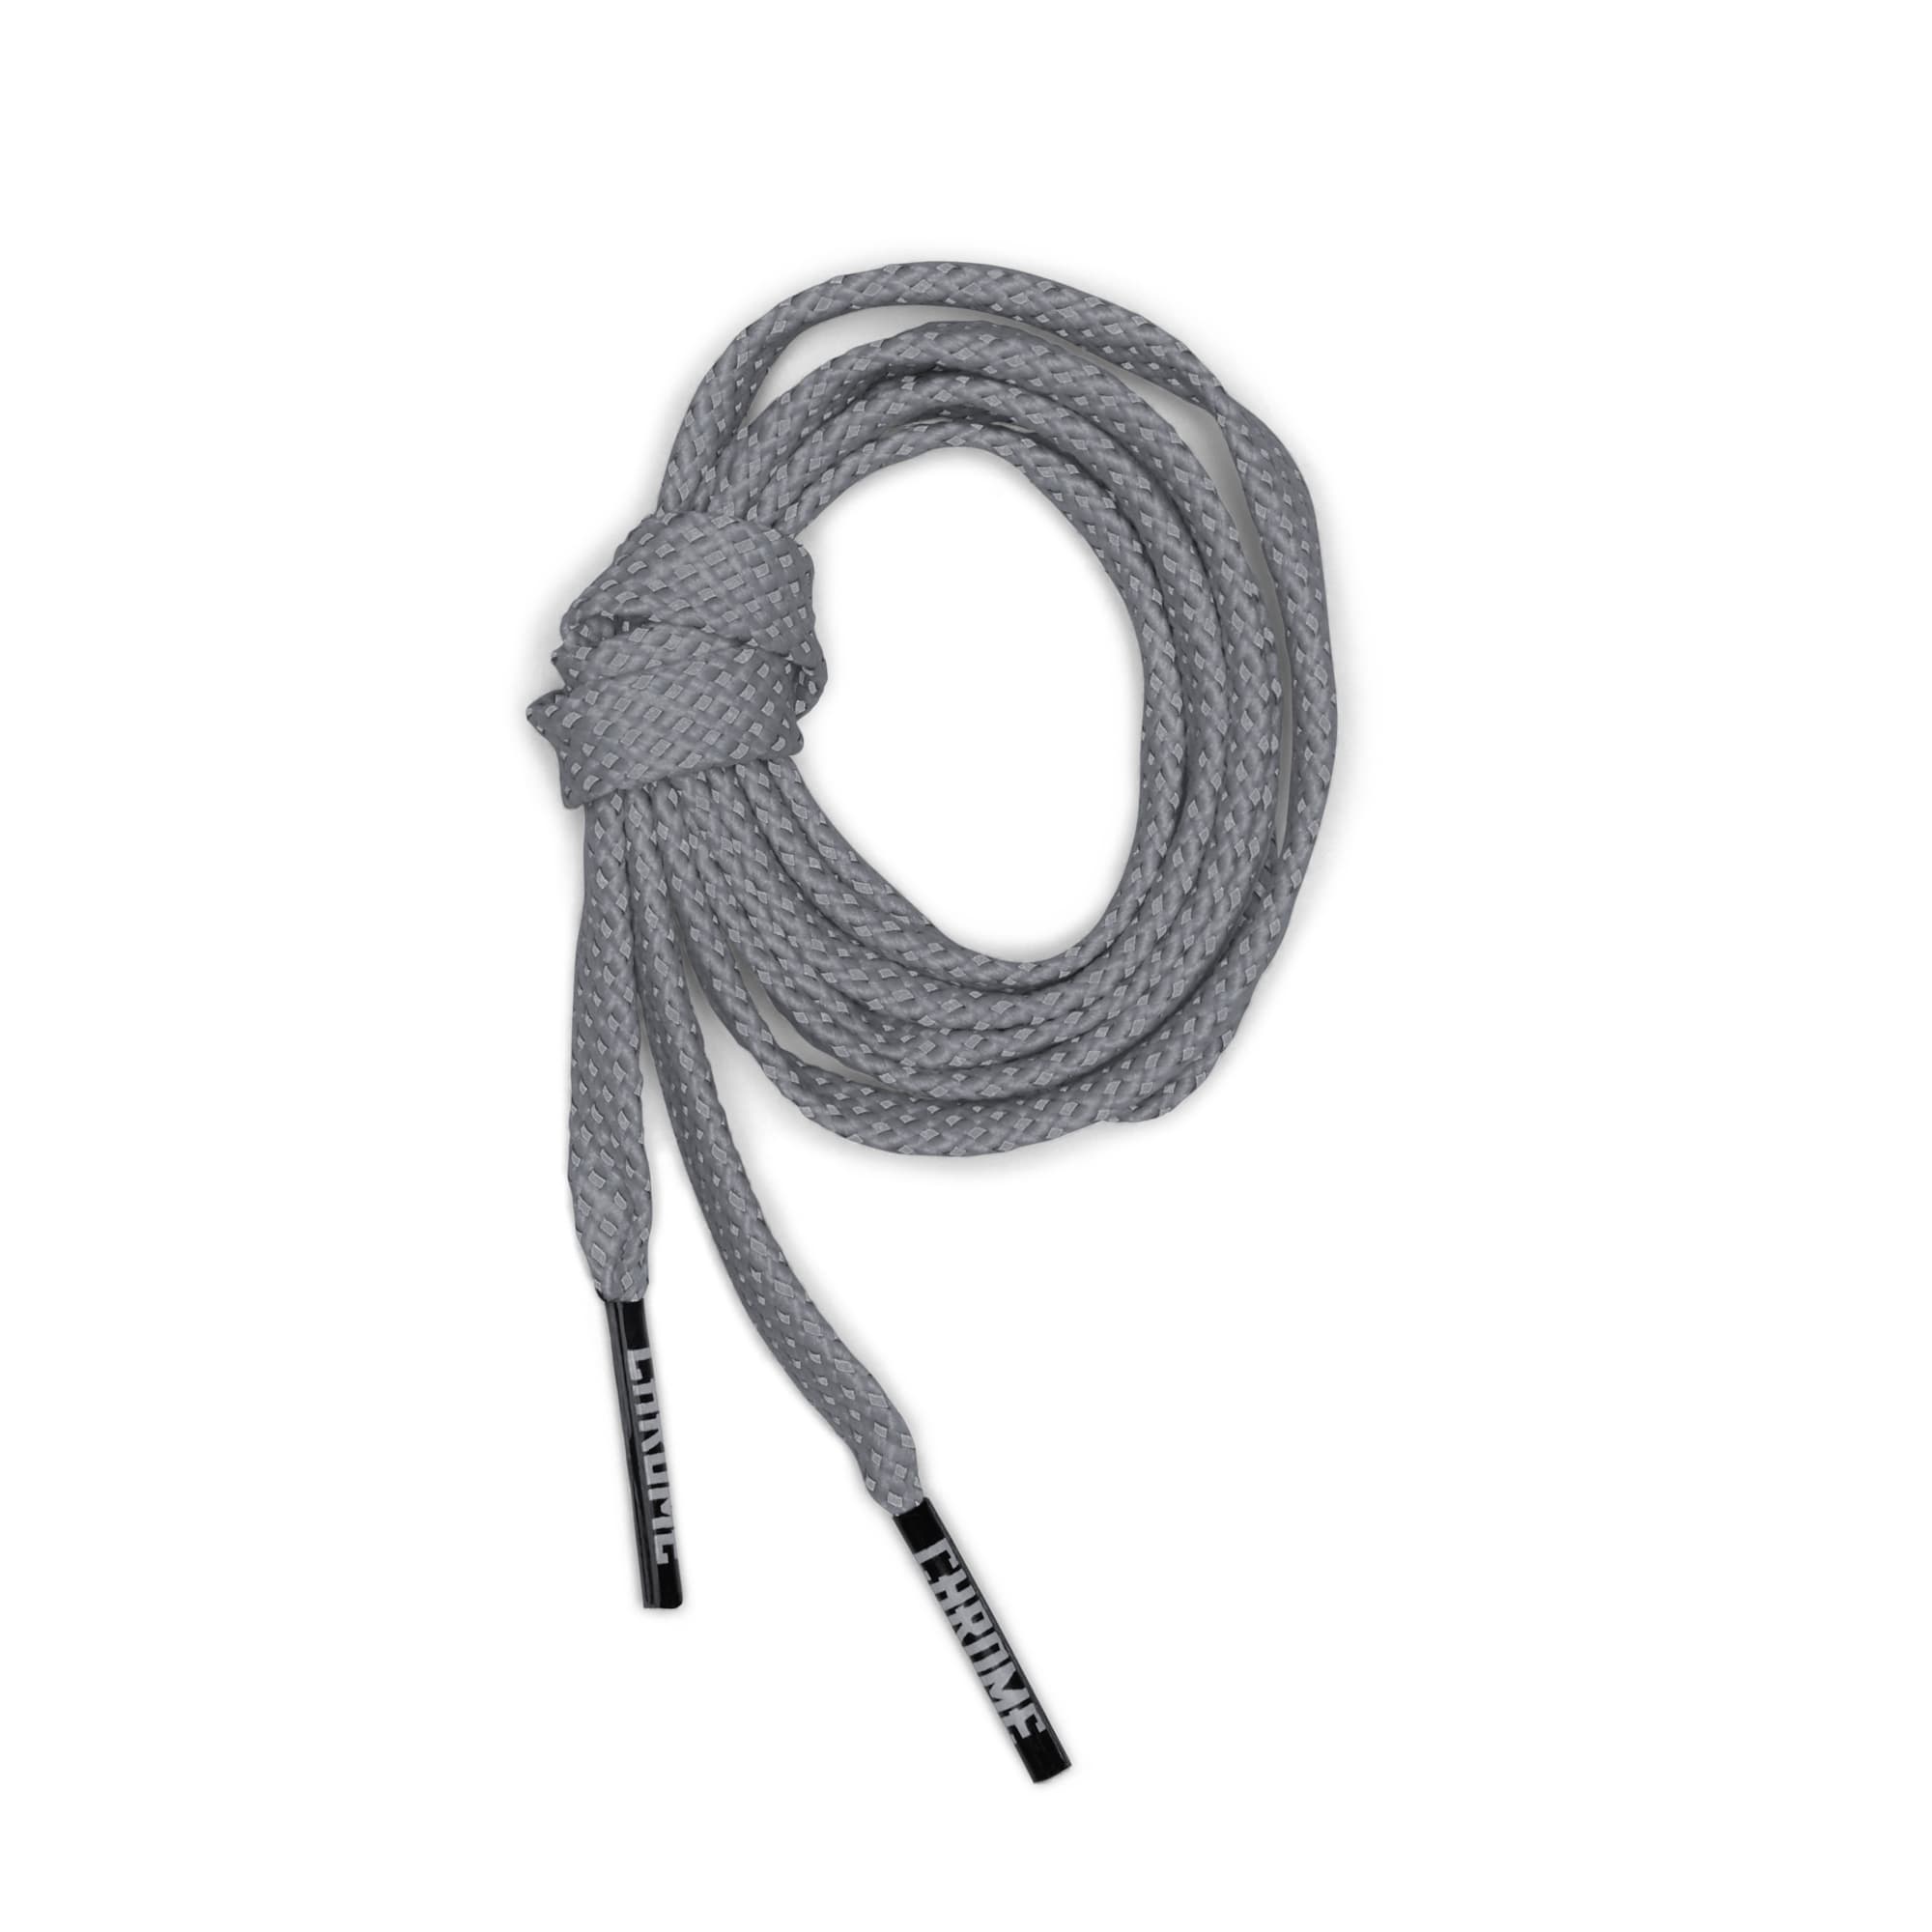 Reflective Flat Shoe Laces in grey rolled up #color_grey reflective